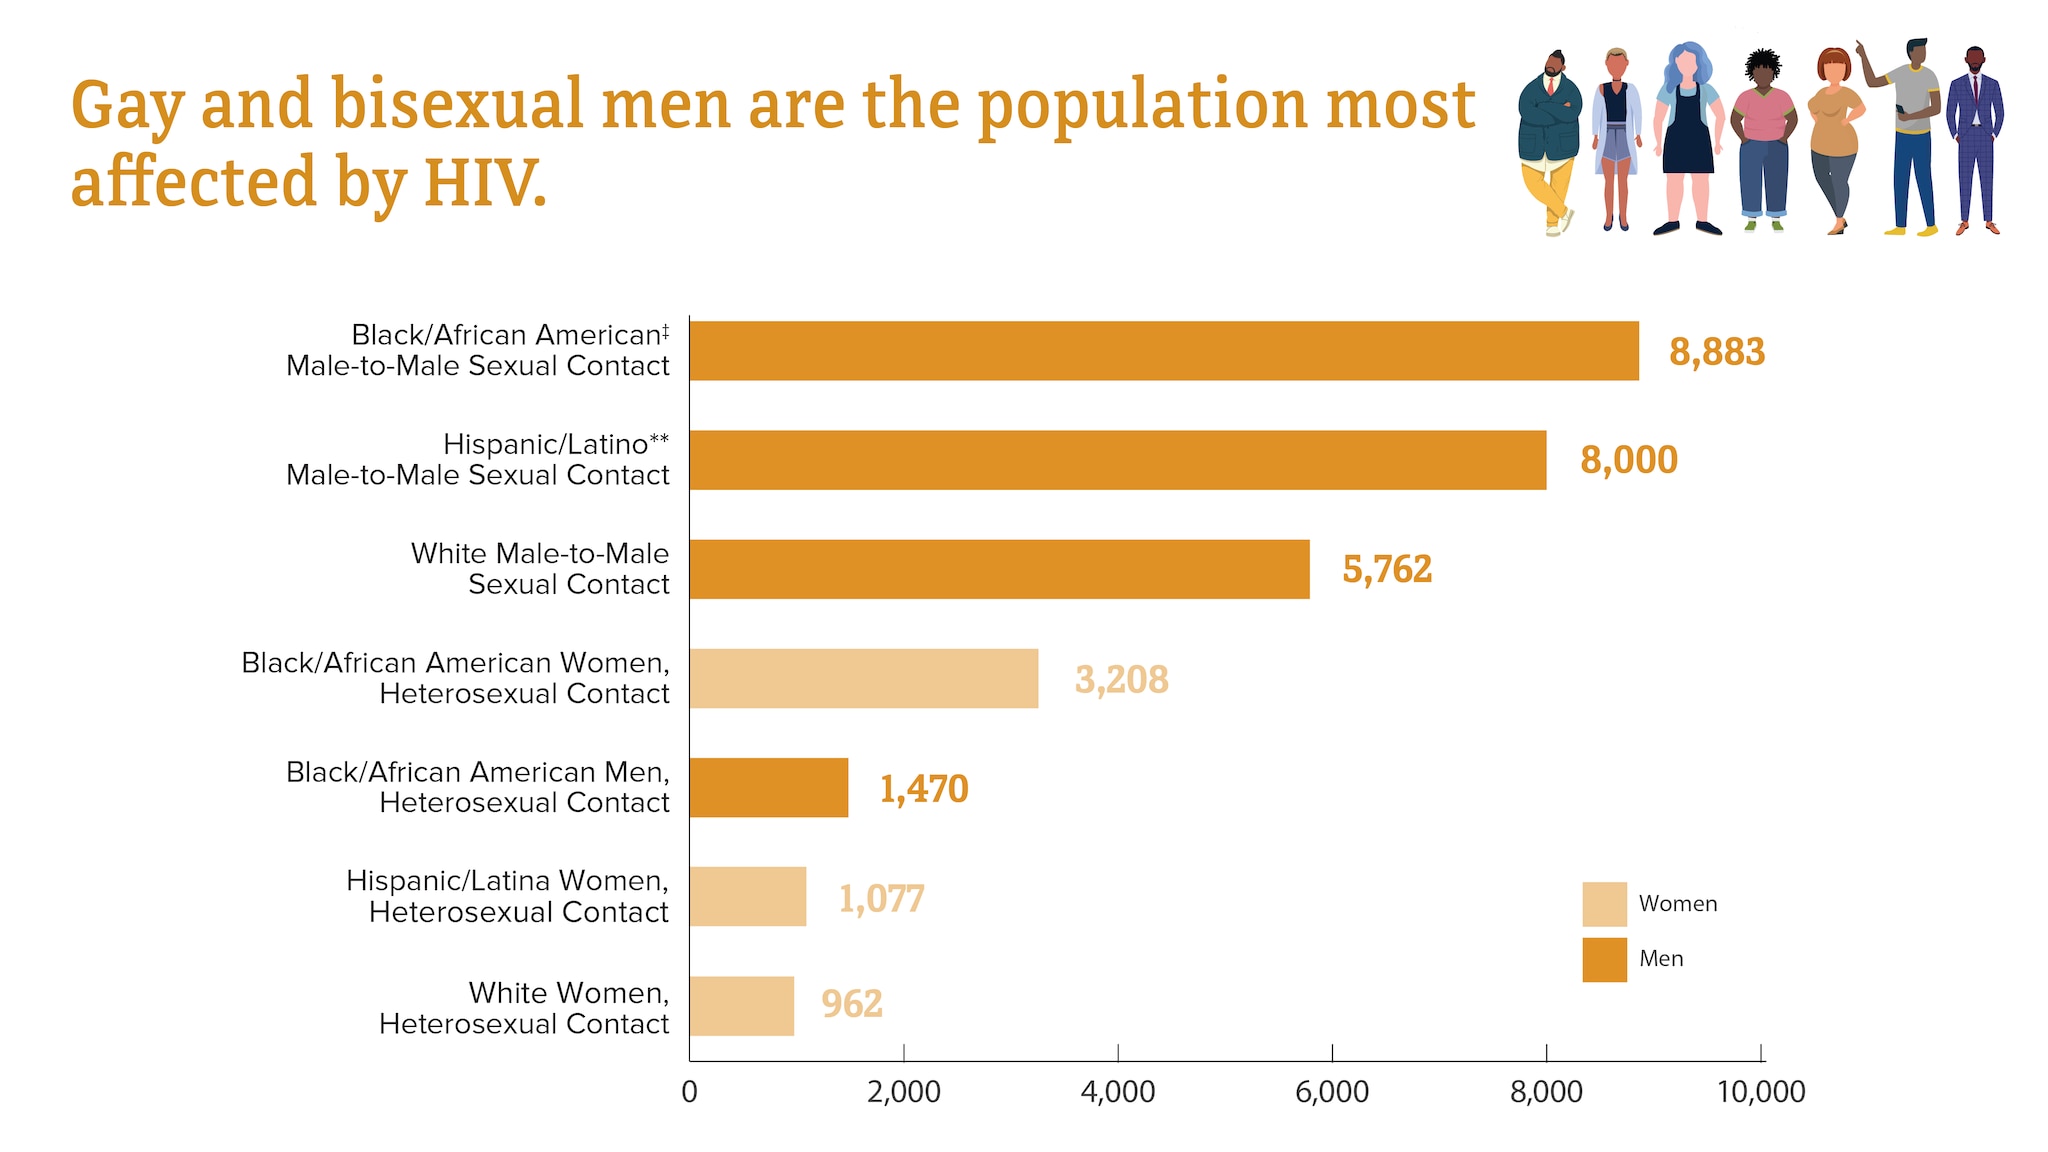 Gay and bisexual men are most affected by HIV. Black/African American with male-to-male sexual contact is the most affected subpopulation, followed by Hispanic/Latino with male-to-male sexual contact, White with male-to-male sexual contact, Black/African American women with heterosexual contact, Black/African men with heterosexual contact, Hispanic/Latina women with heterosexual contact, and White women with heterosexual contact.